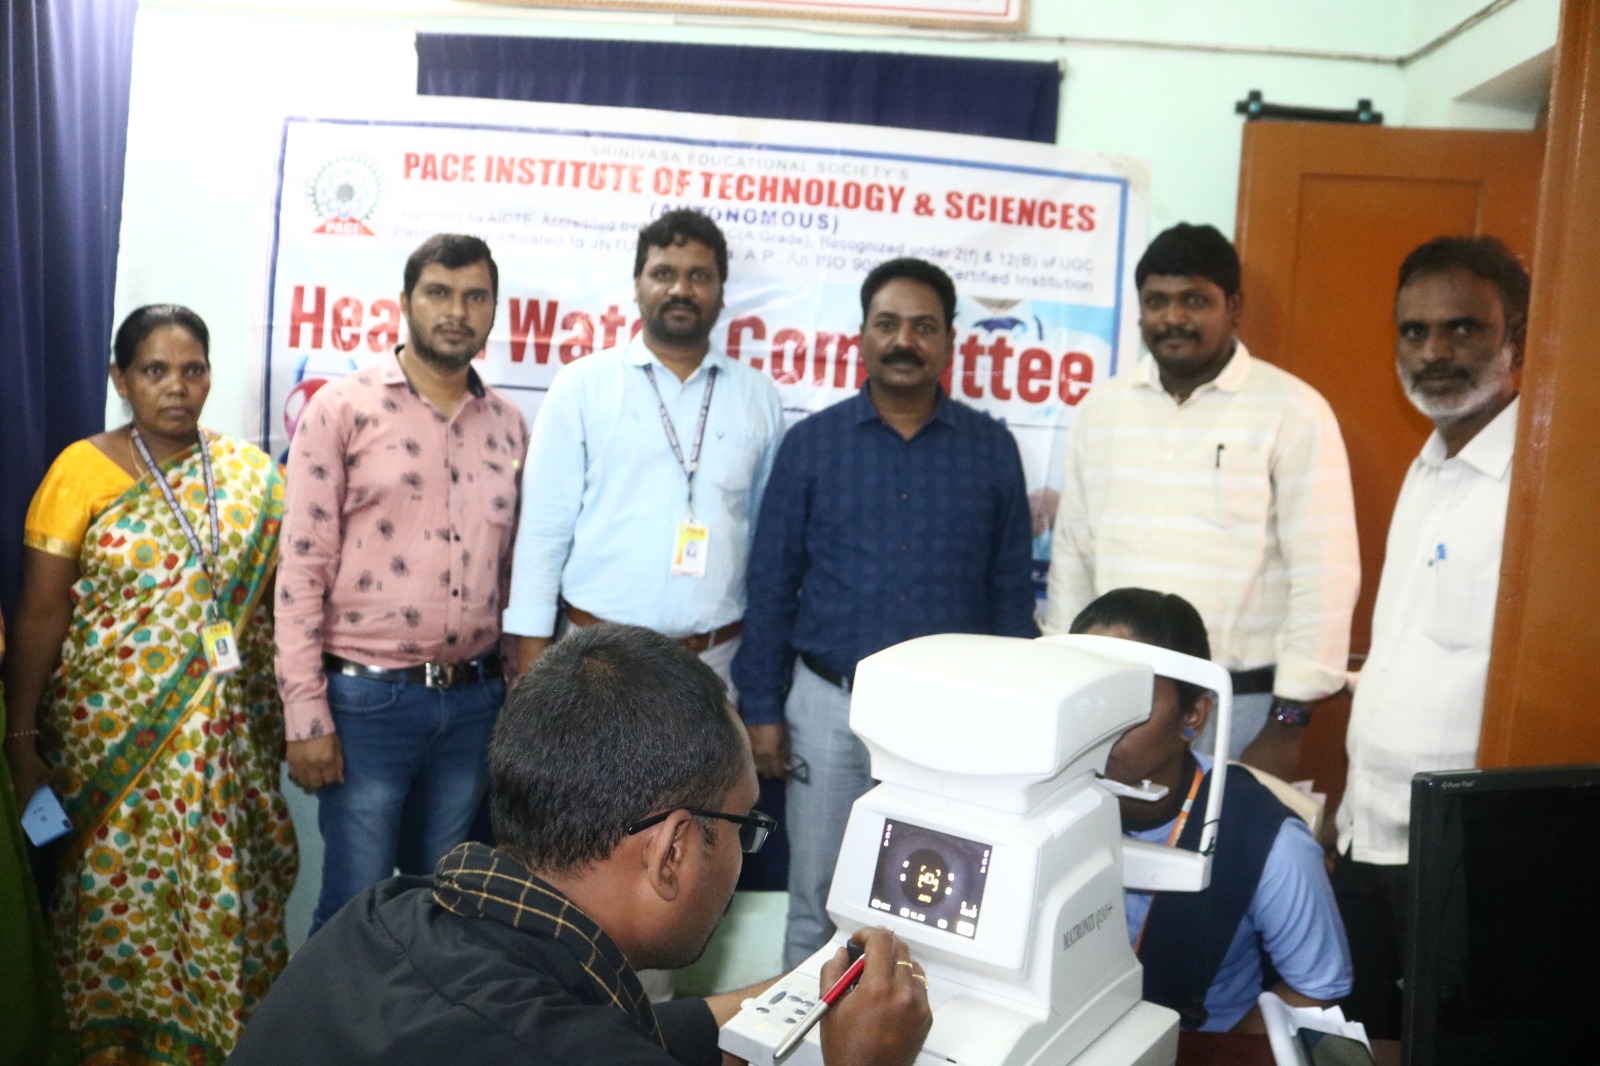 three days free eye check up camp , organized by health watching committee